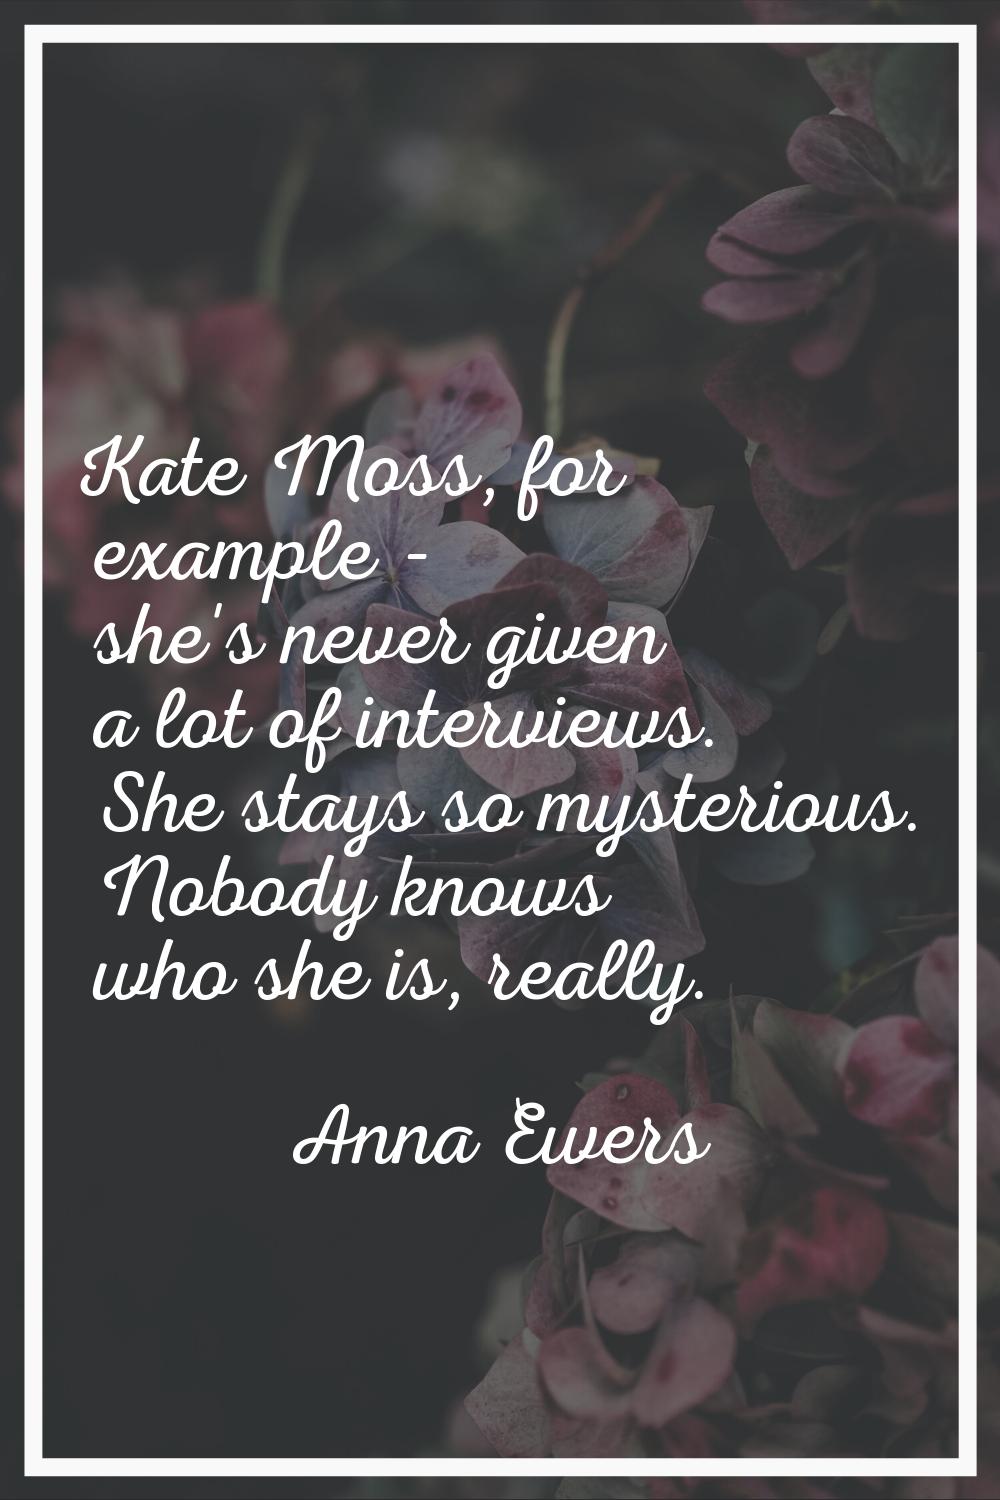 Kate Moss, for example - she's never given a lot of interviews. She stays so mysterious. Nobody kno